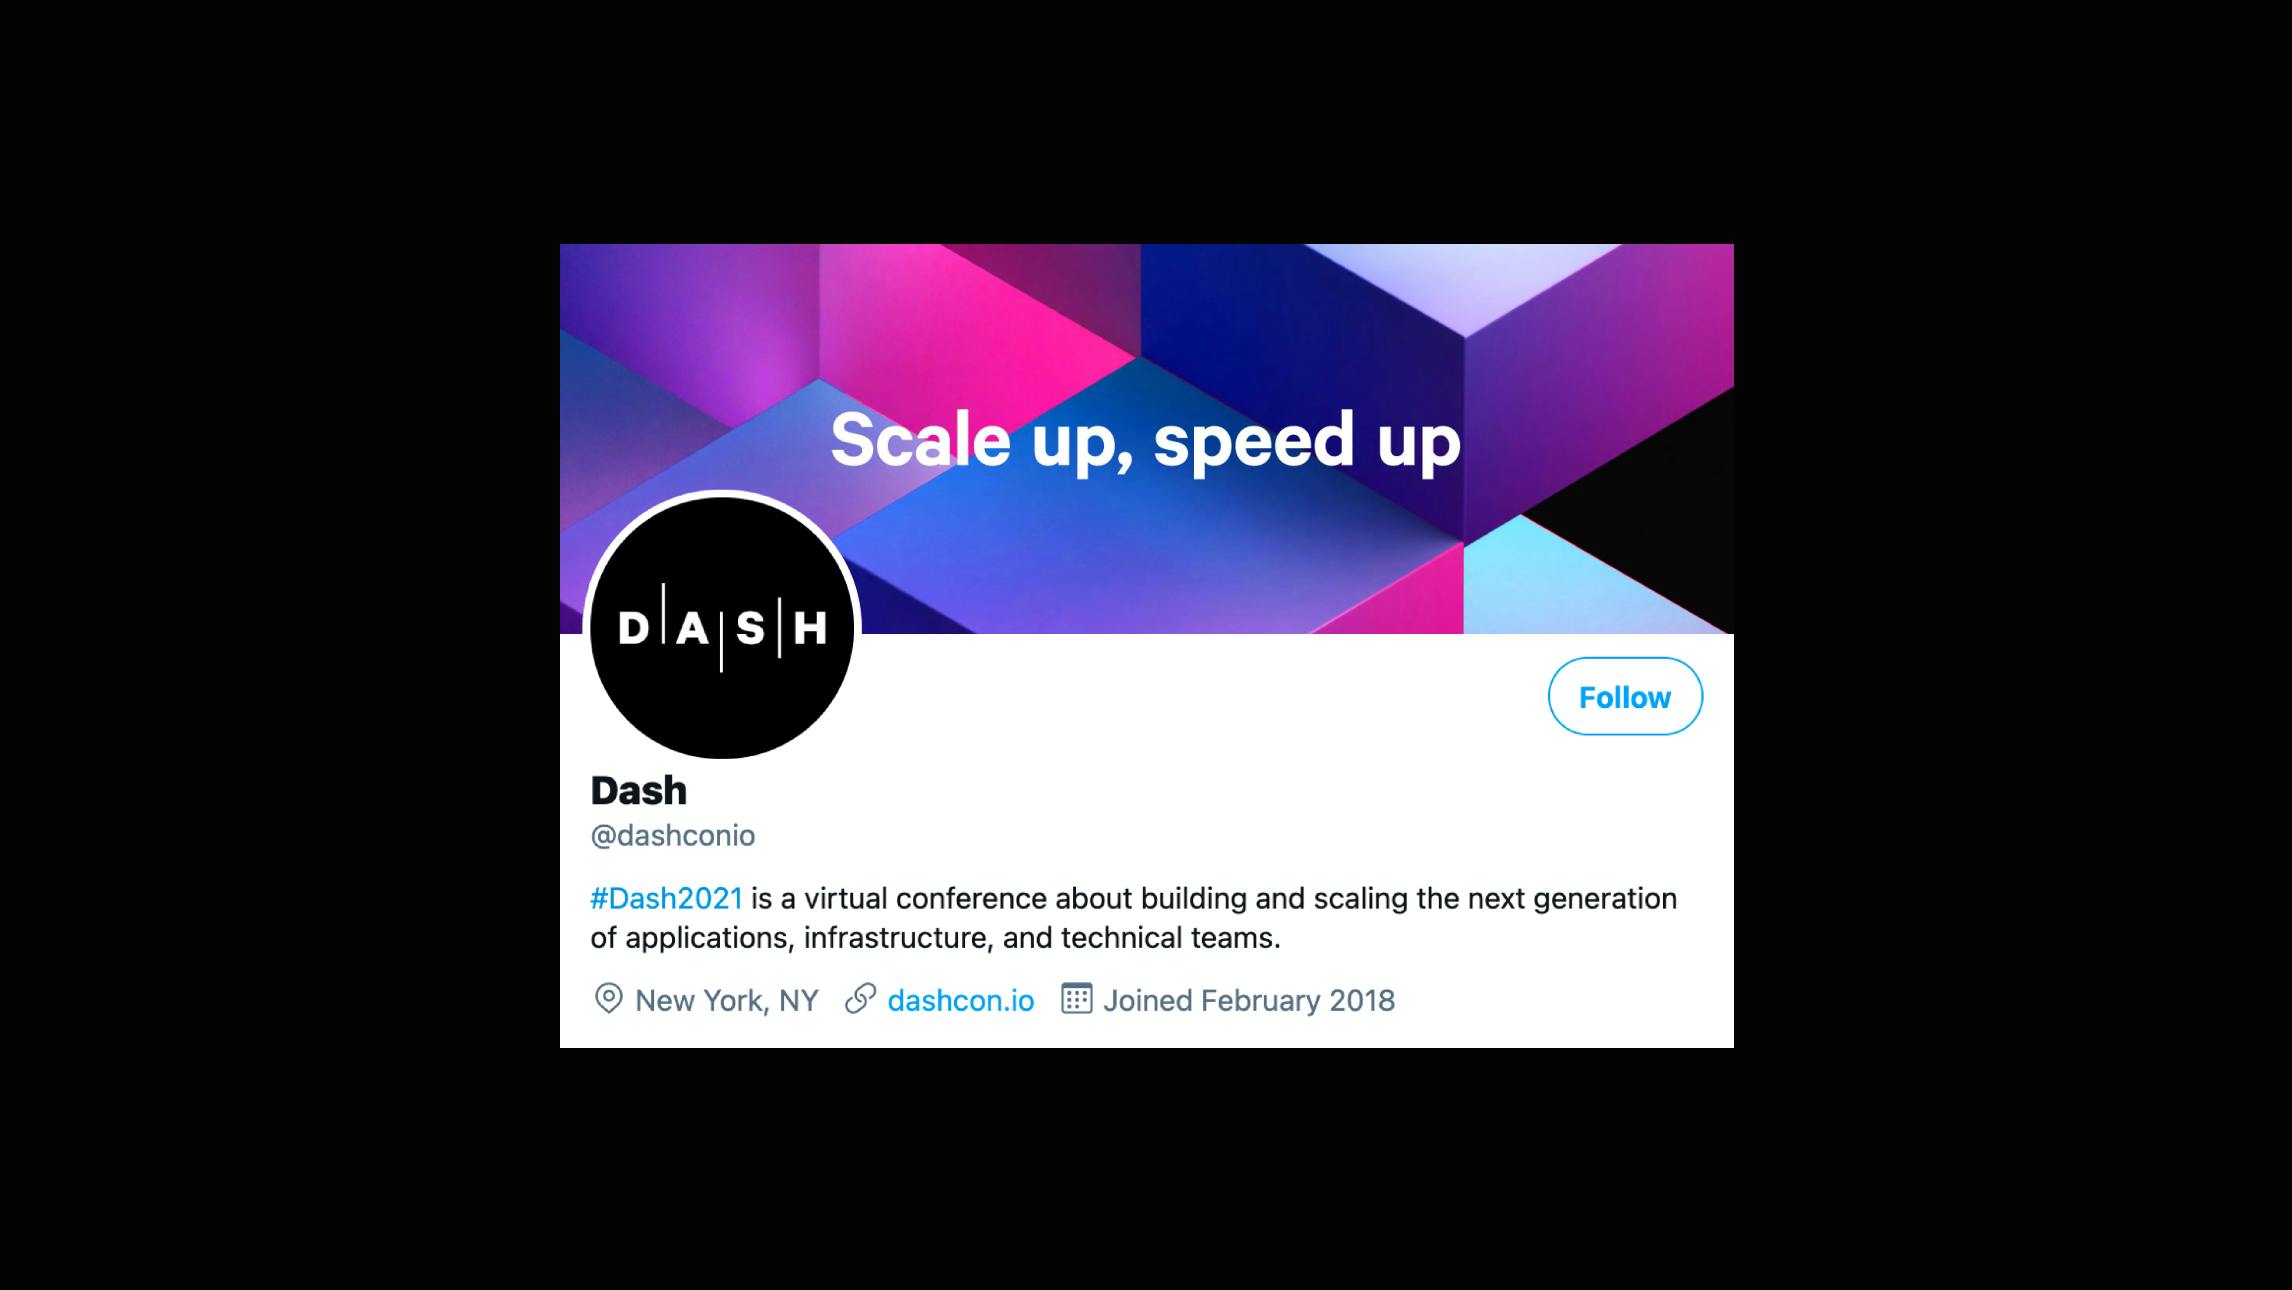 A screencapture of the @dashconio twitter profile, centered on a black background.